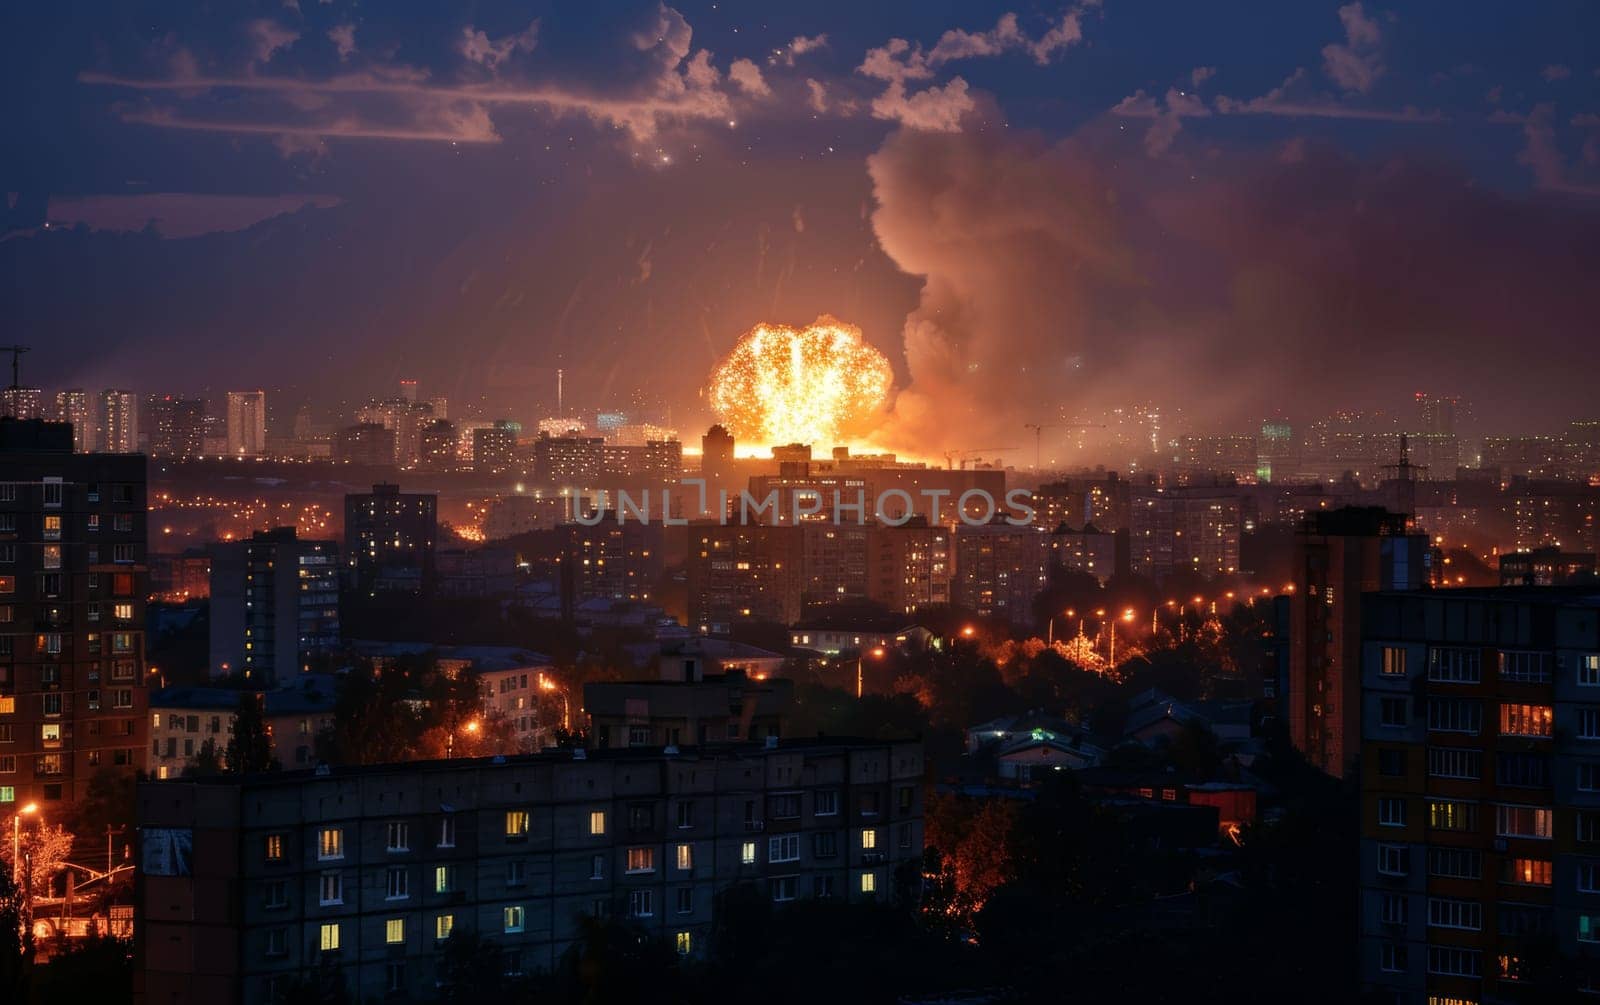 The fiery explosion over a city at twilight paints a scene of chaos and beauty, a juxtaposition of destruction against the quiet night.. by sfinks